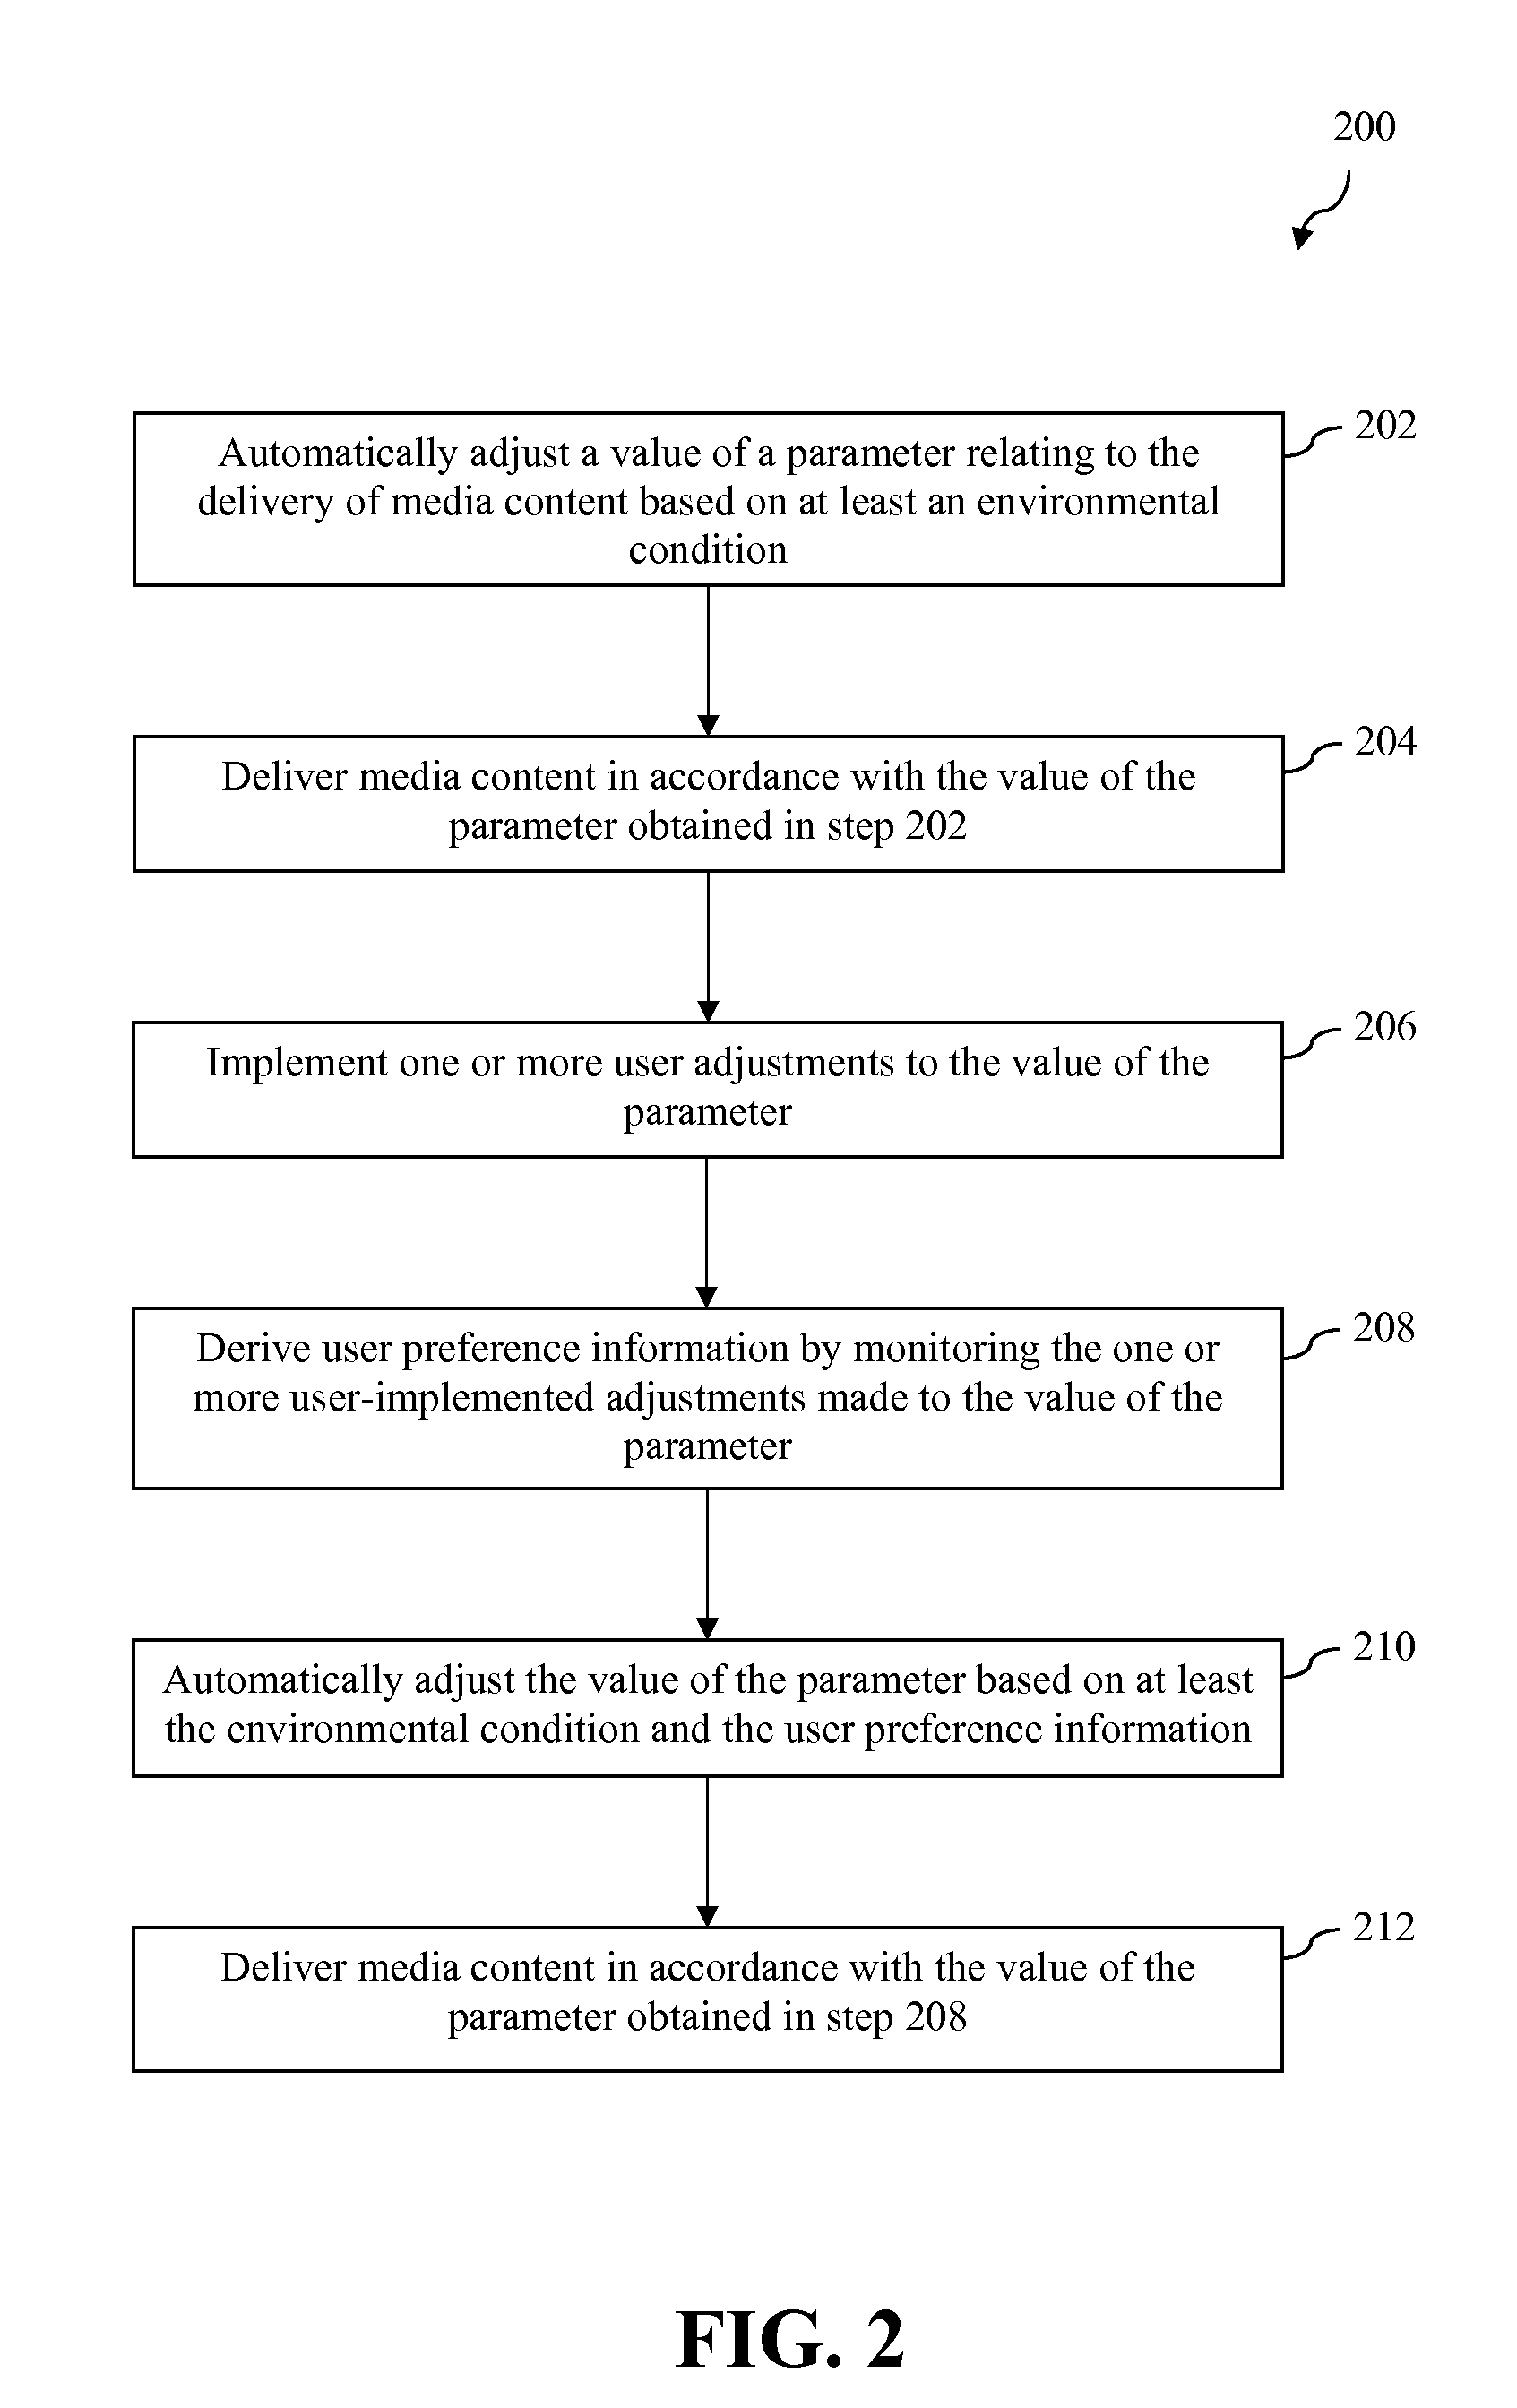 Adjustment of media delivery parameters based on automatically-learned user preferences